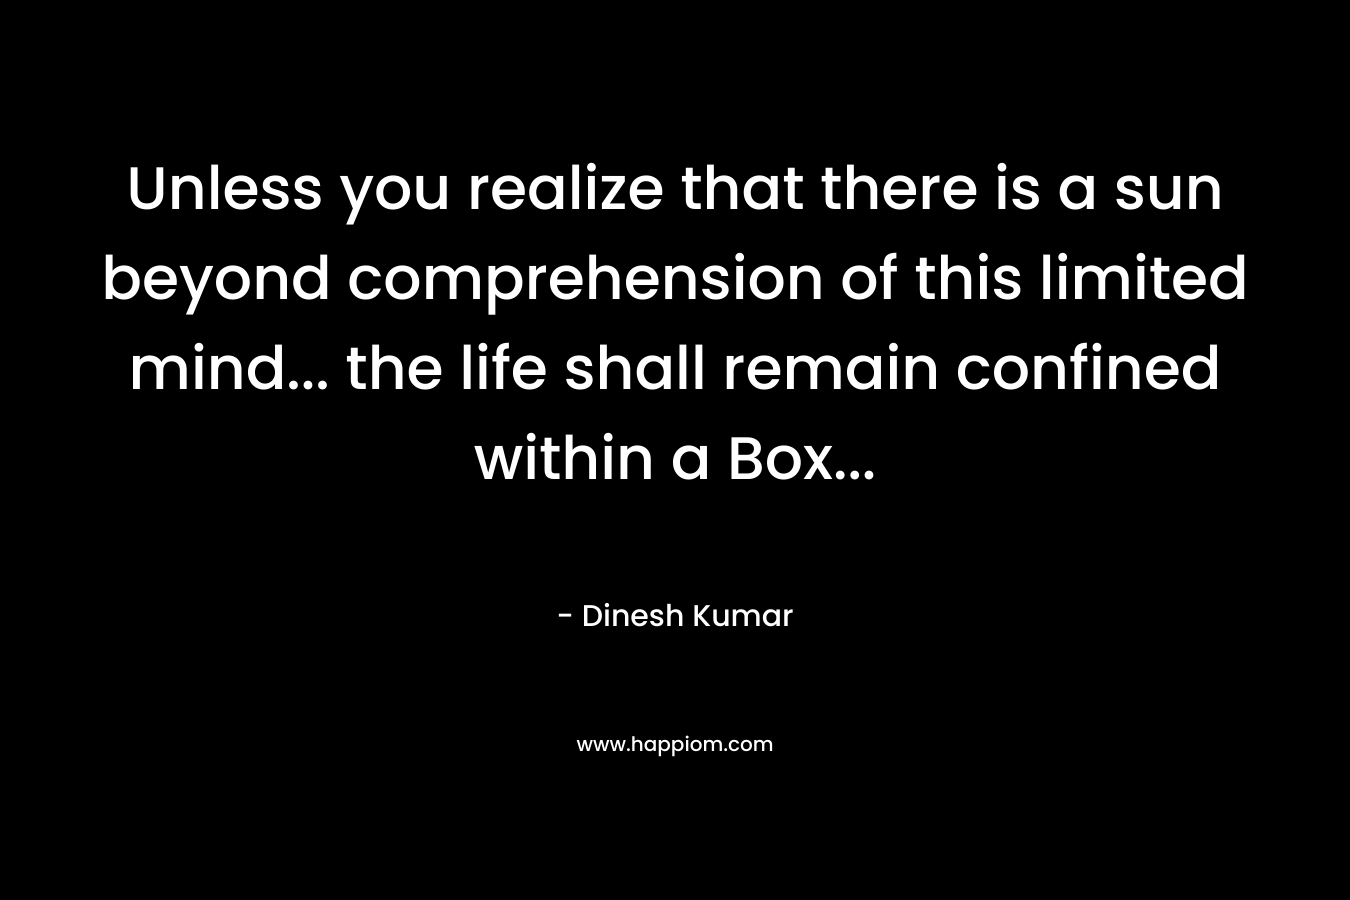 Unless you realize that there is a sun beyond comprehension of this limited mind... the life shall remain confined within a Box...